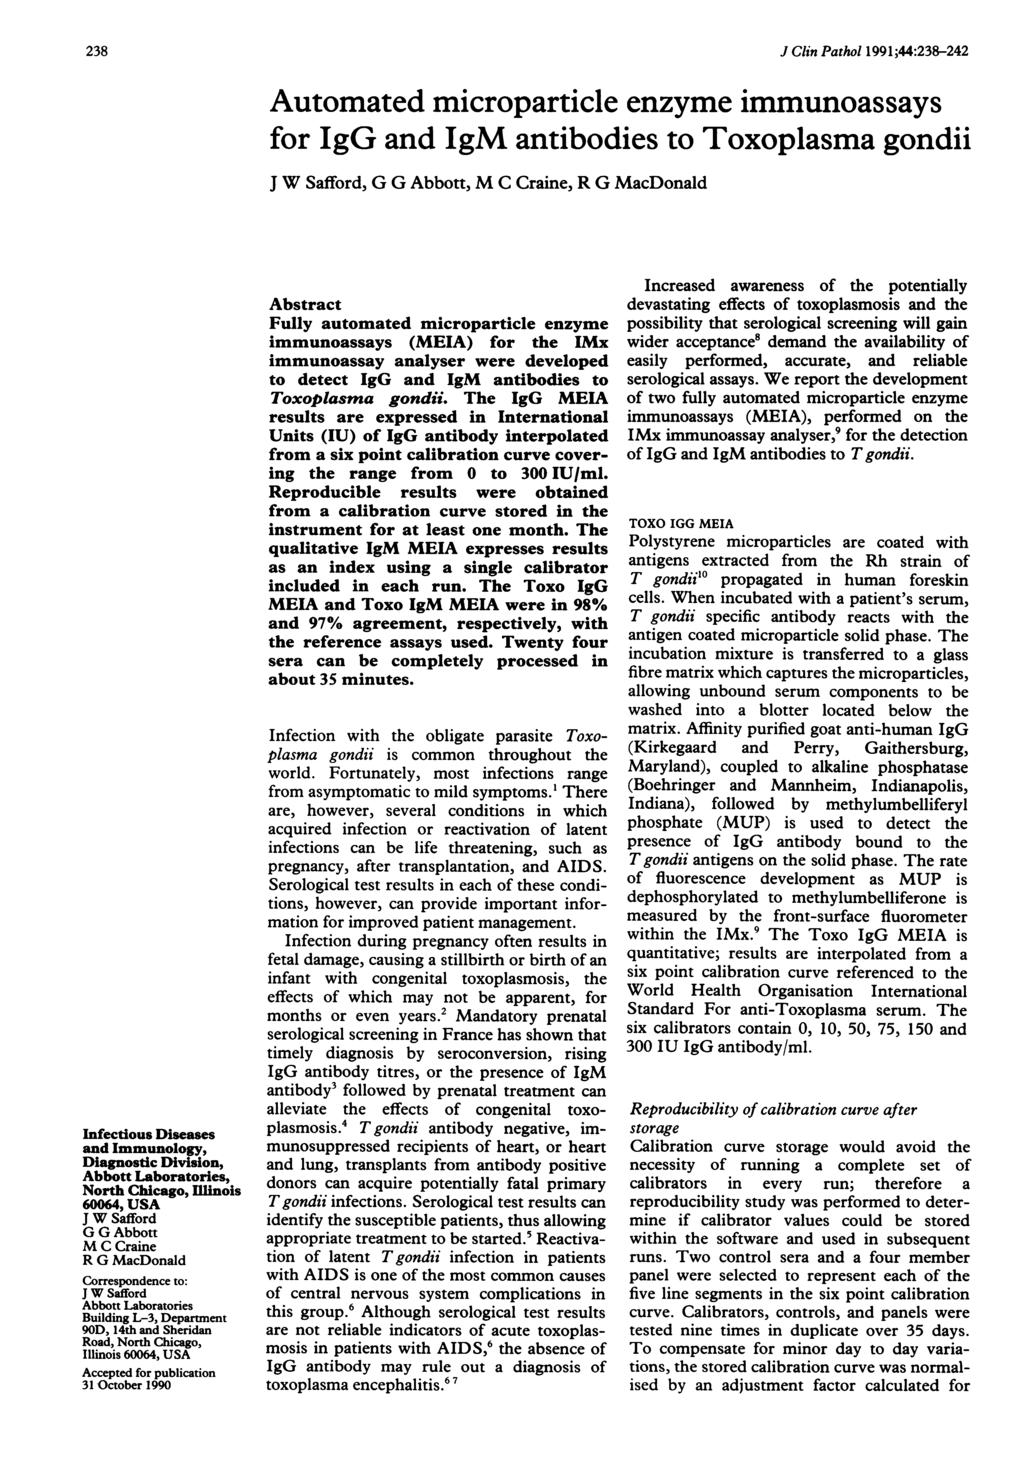 238 Infectious Diseases and Immunology, Diagnostic Division, Abbott Laboratories, North Chicago, Illinois 60064, USA J W Safford G G Abbott M C Craine R G MacDonald Correspondence to: J W Safford